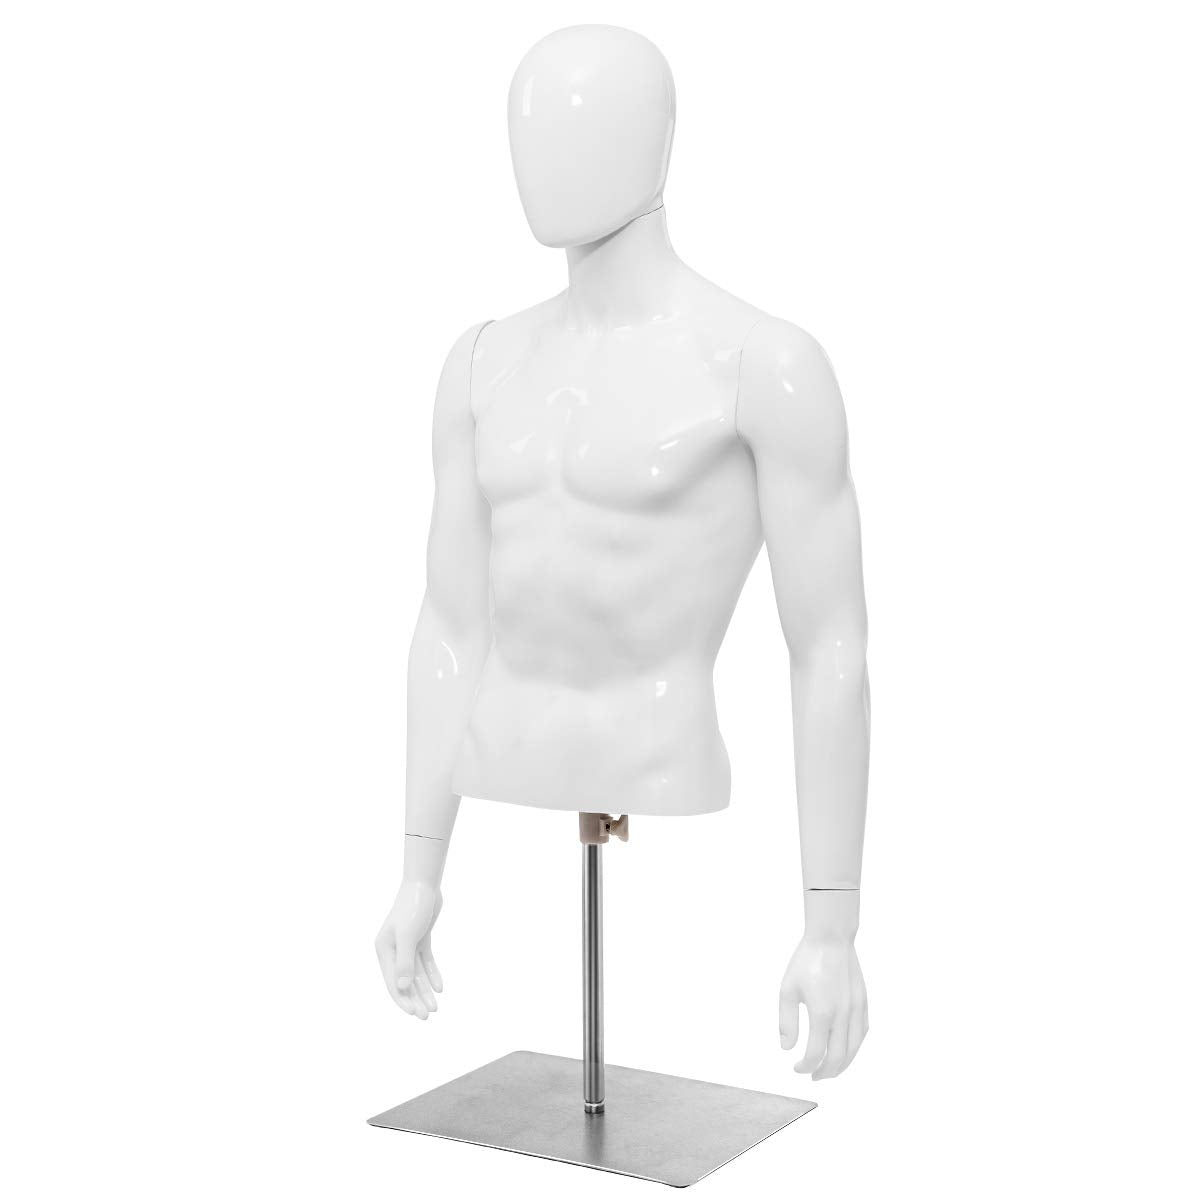 Giantex Male Mannequin Torso Adjustable Height Detachable Arms Dress Form Display w/Metal Stand, Bright White